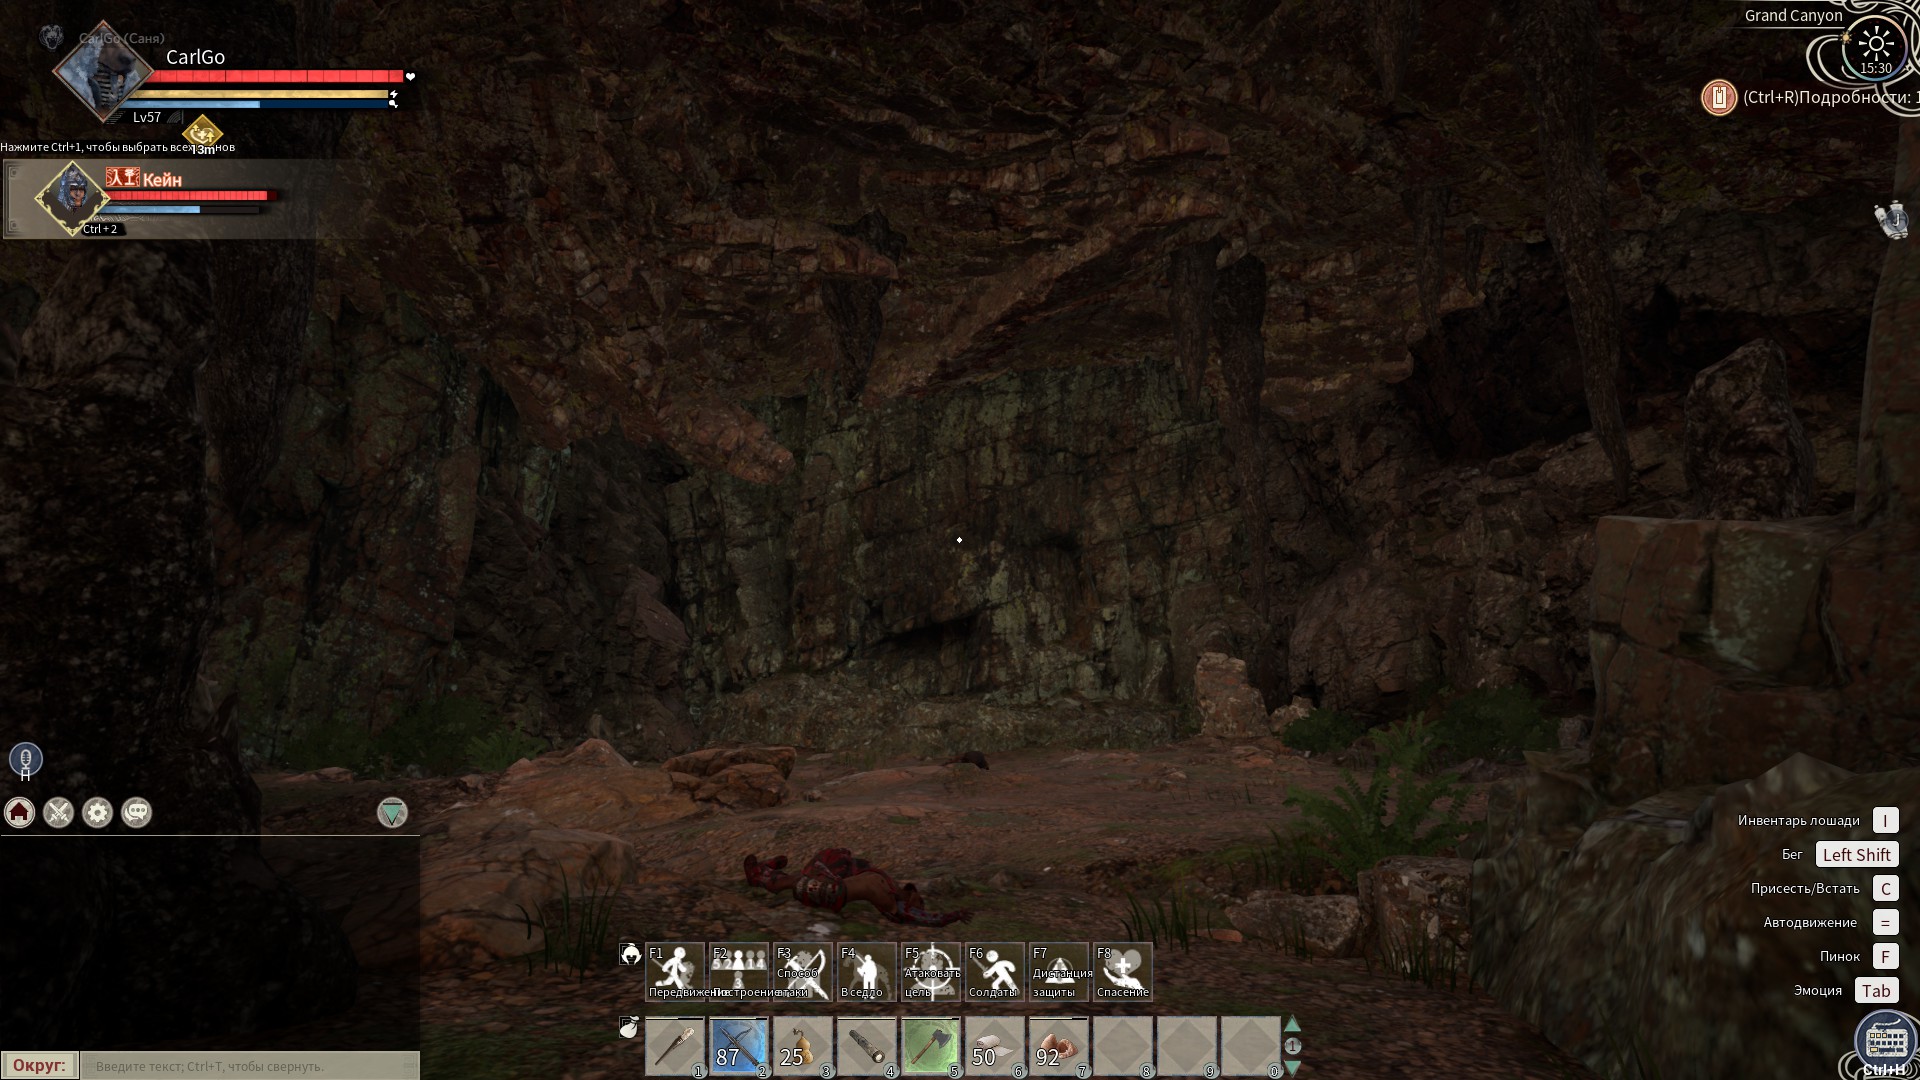 : /Locations: Cave image 43